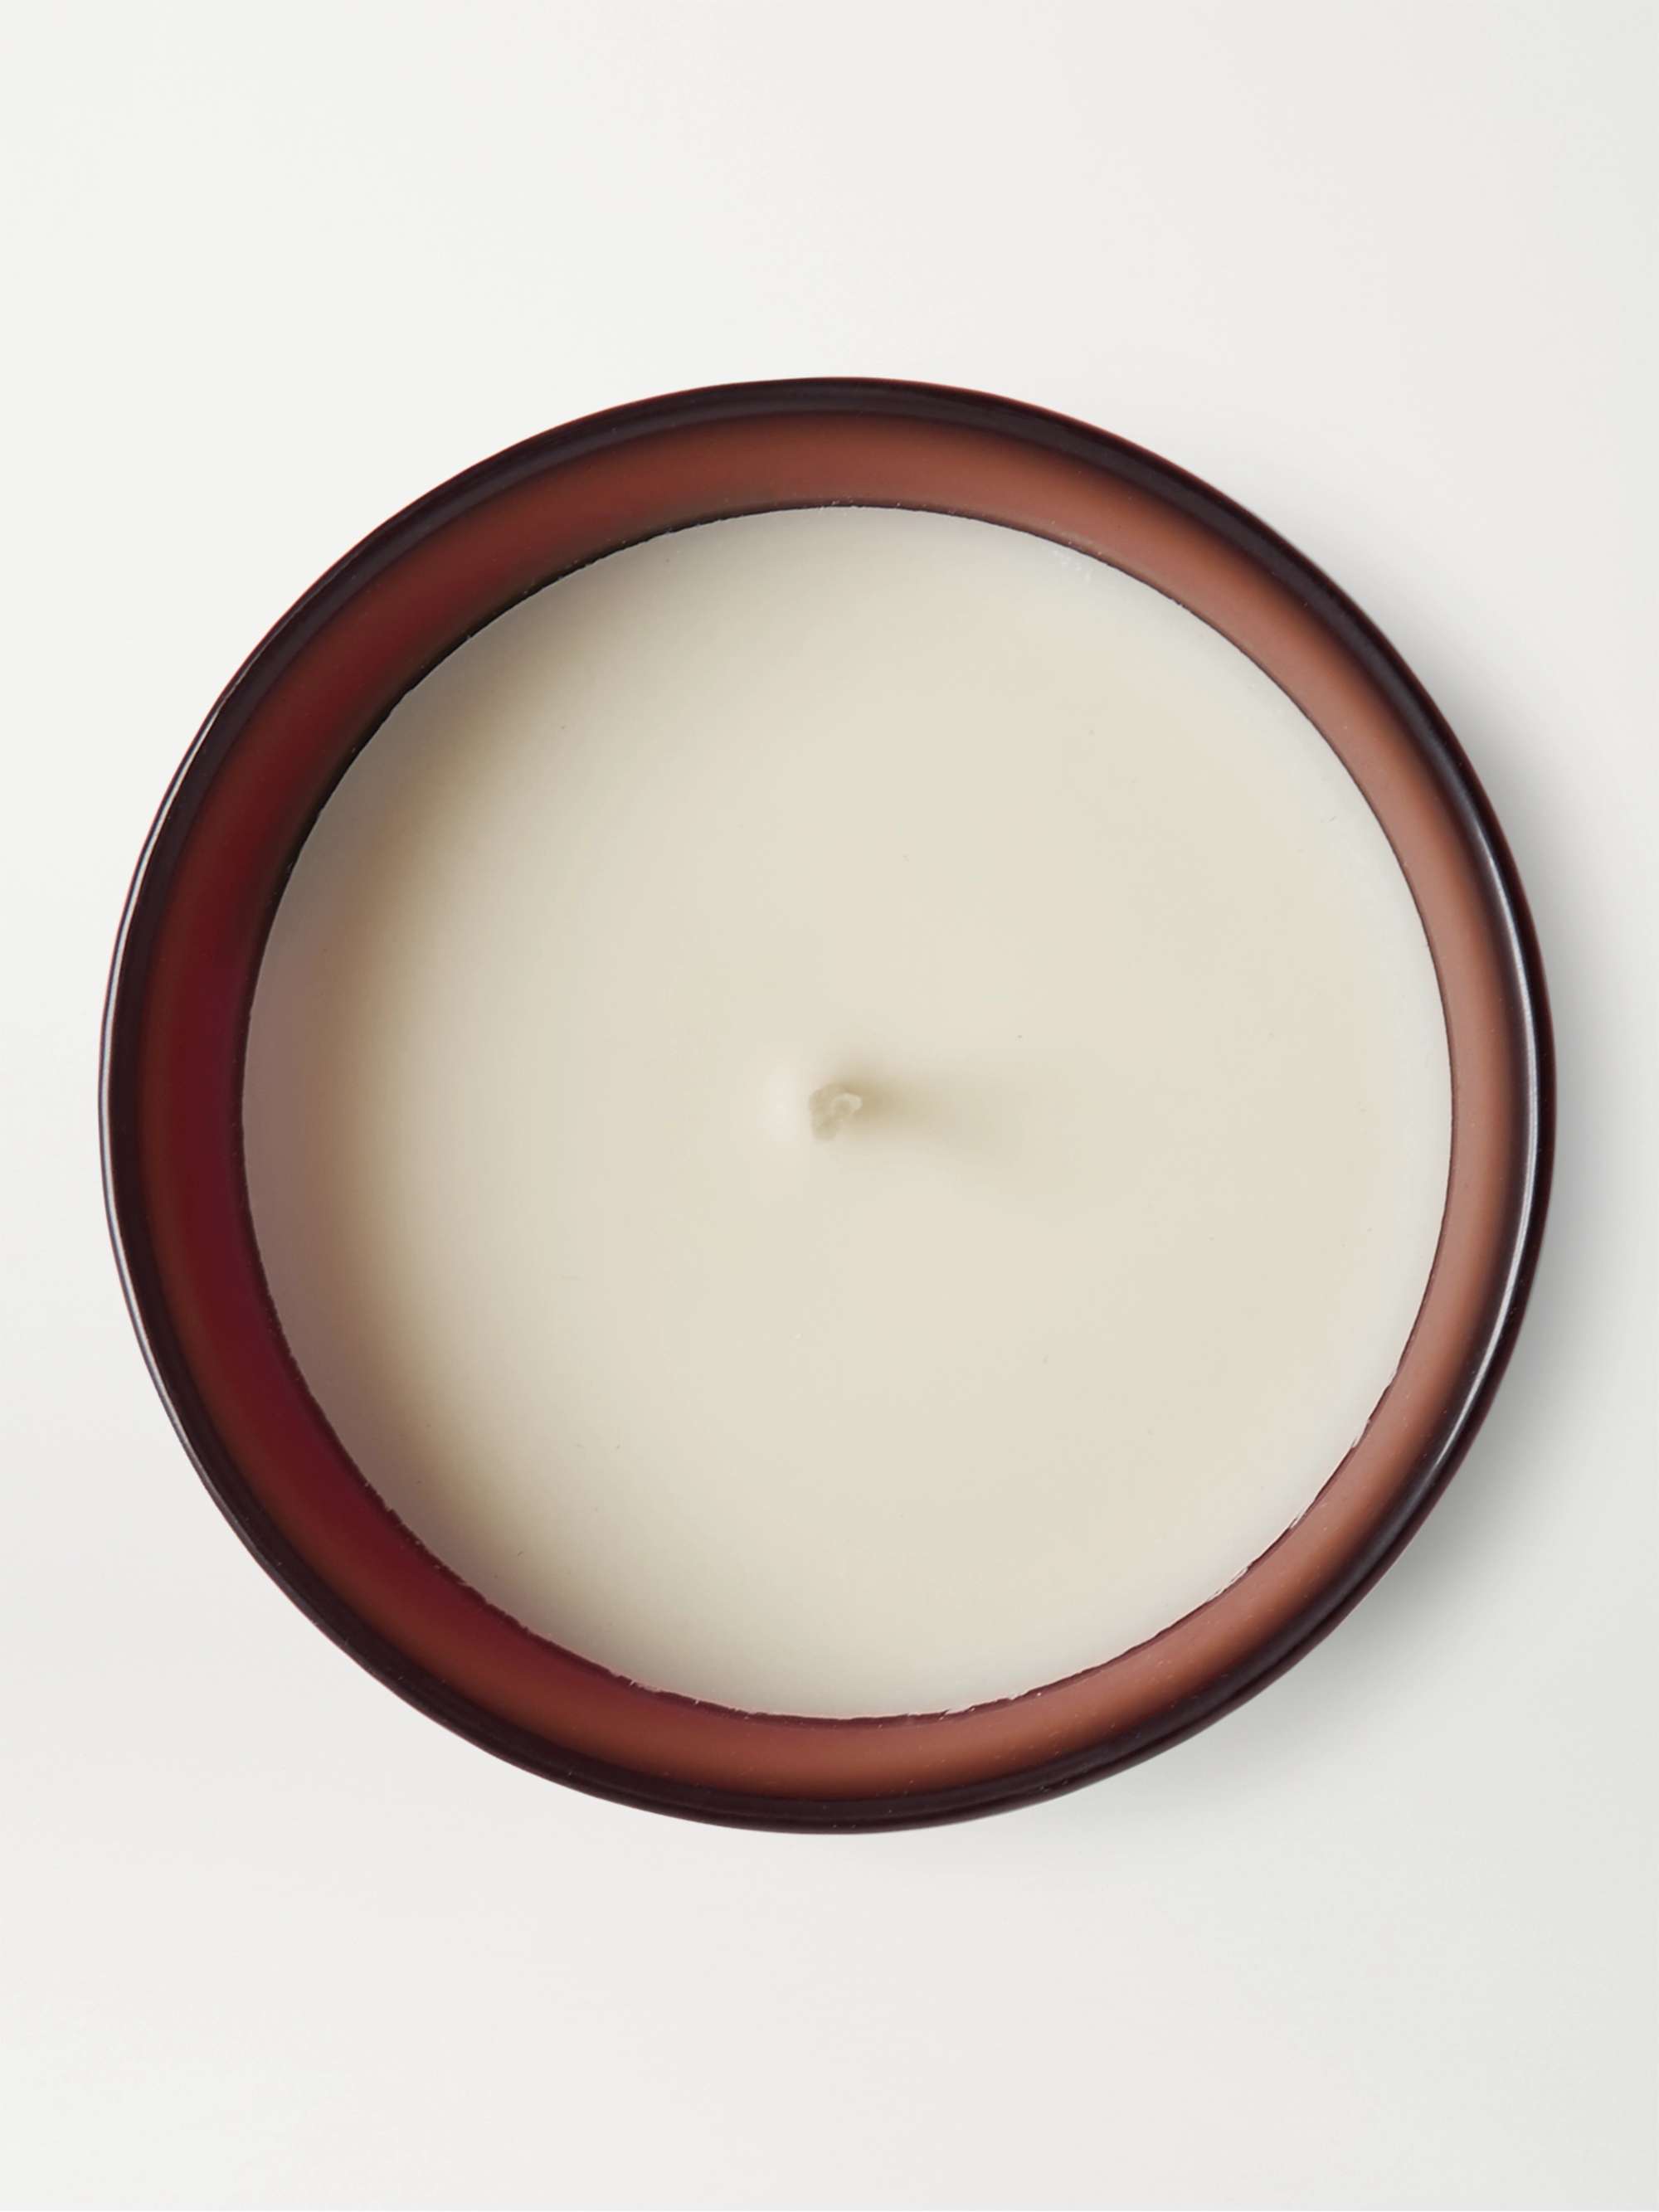 TRUDON Cyrnos Scented Candle, 270g